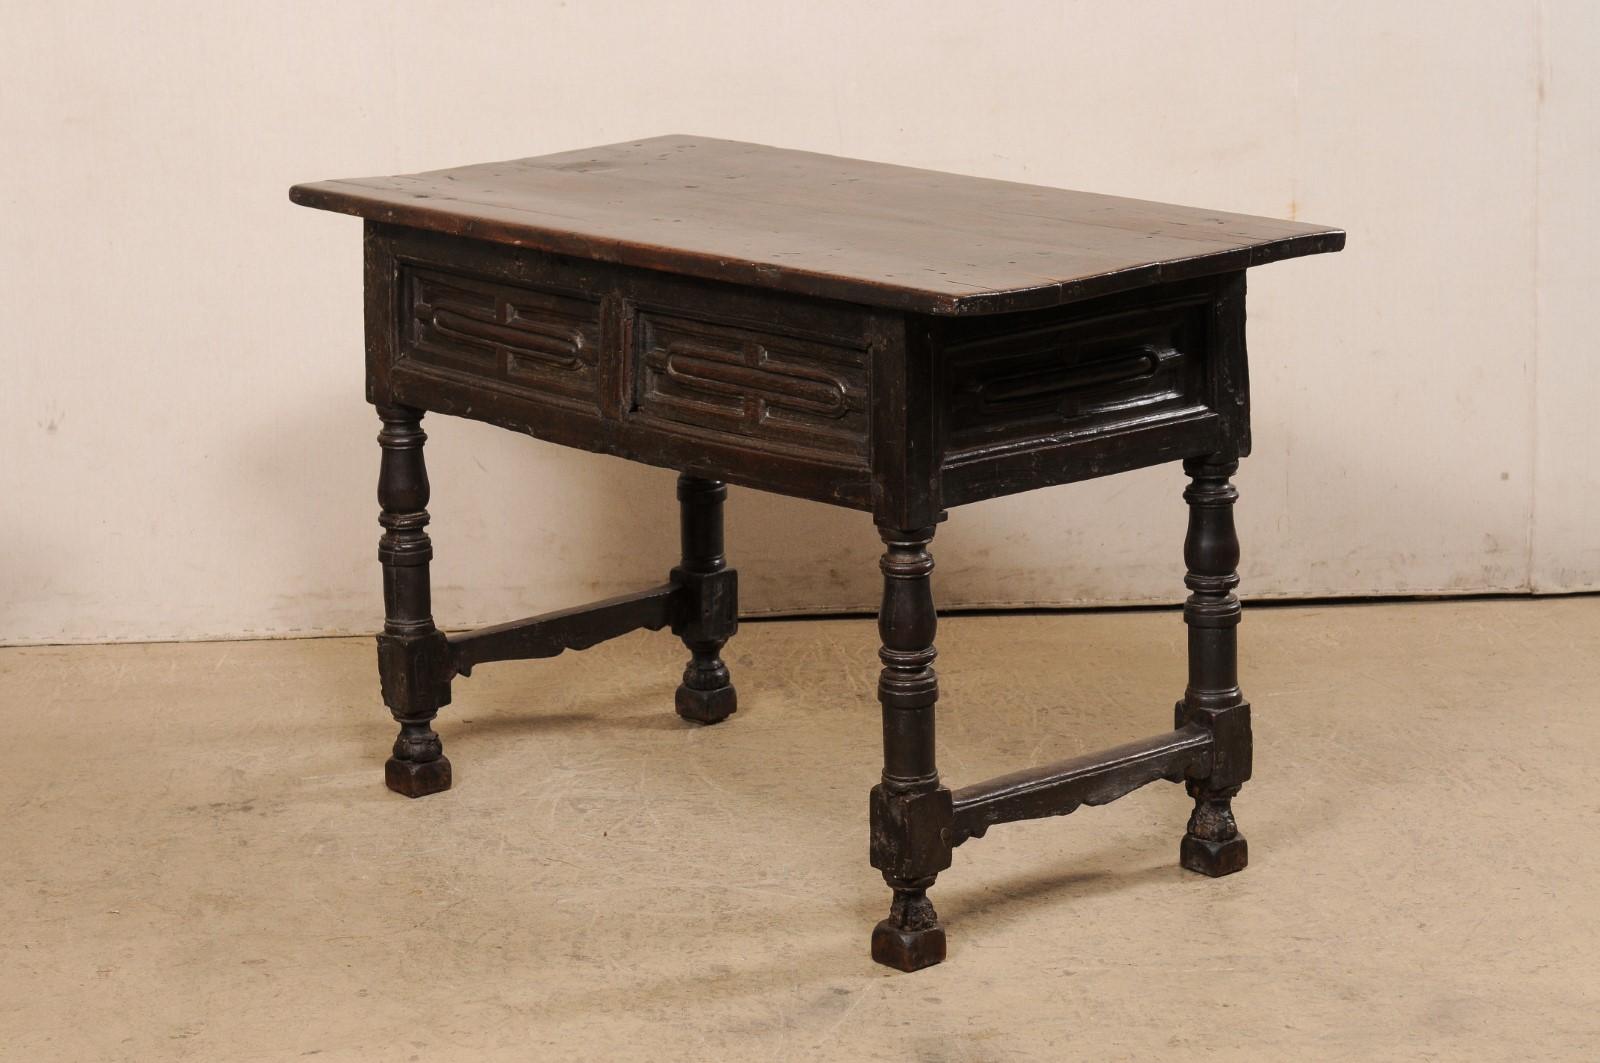 Italian Carved-Walnut Occasional Table W/Drawers, All Sides Carved, Early 18th C For Sale 3